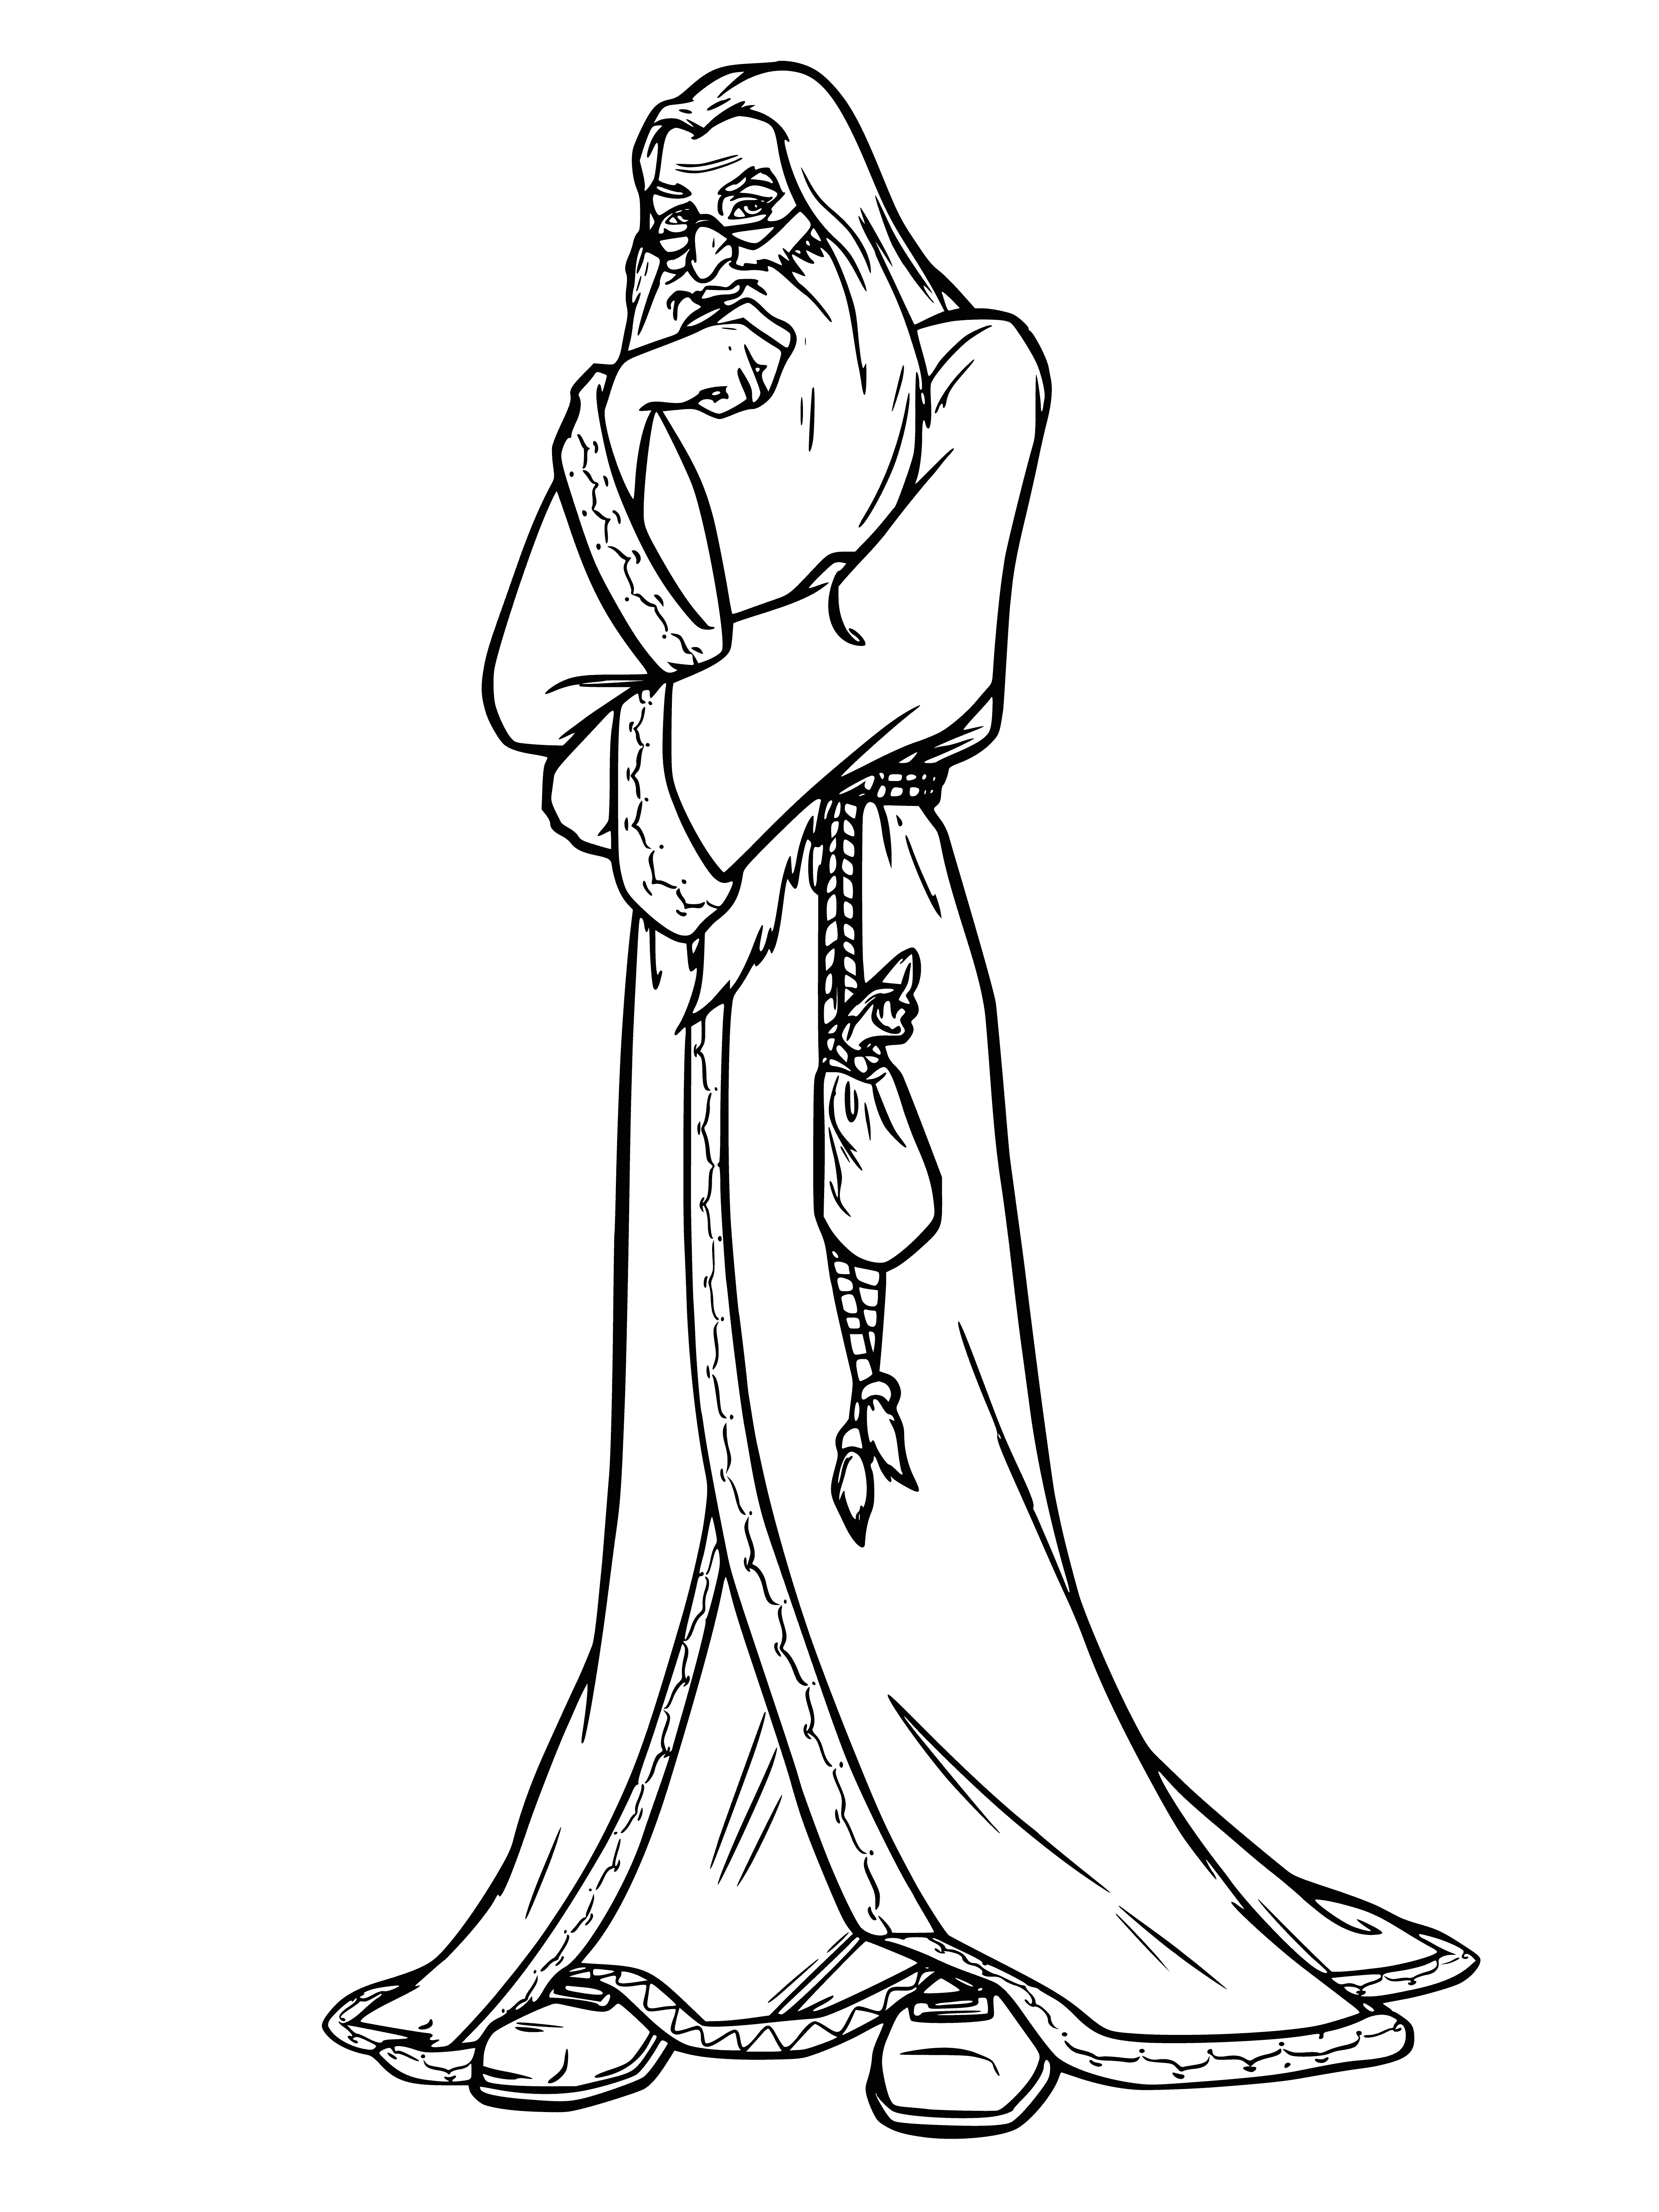 coloring page: Old man in long, black robe holds a wand & has kindly face but hint of sadness in his eyes.